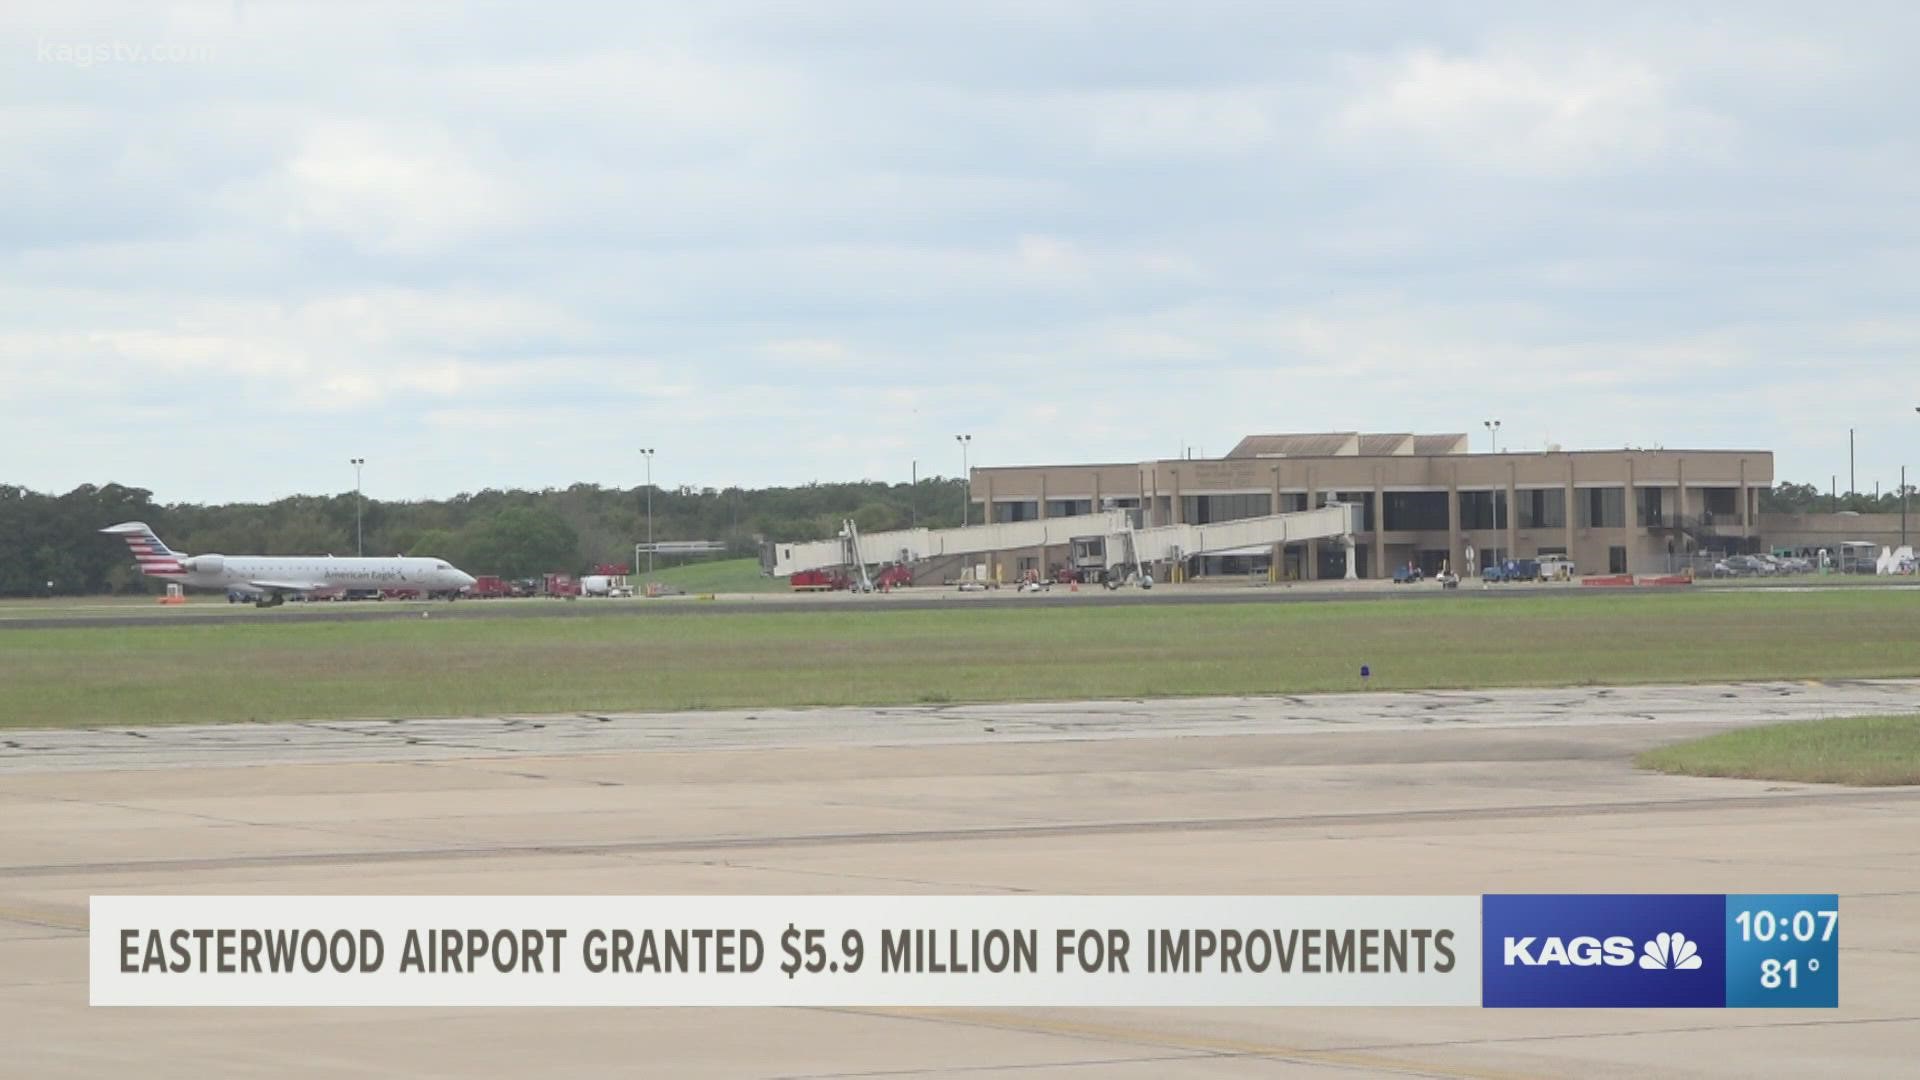 The FAA approved grant looks to expand plane ramps and won't affect passenger travel